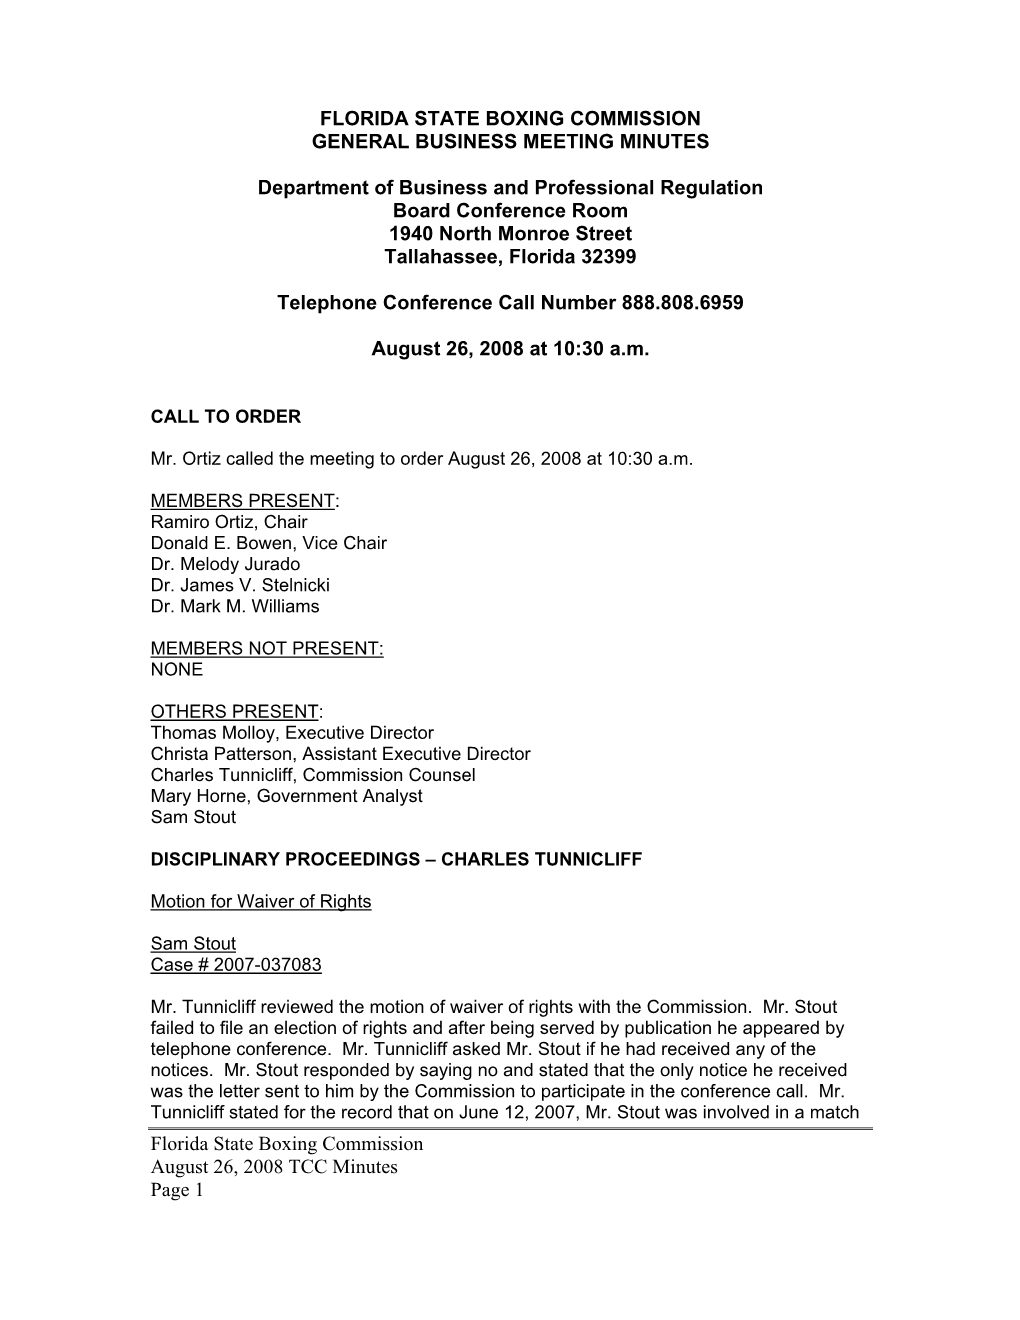 Florida State Boxing Commission August 26, 2008 TCC Minutes Page 1 Where He Suffered Injuries to His Eye and Scalp and Required an Emergency Room Evaluation